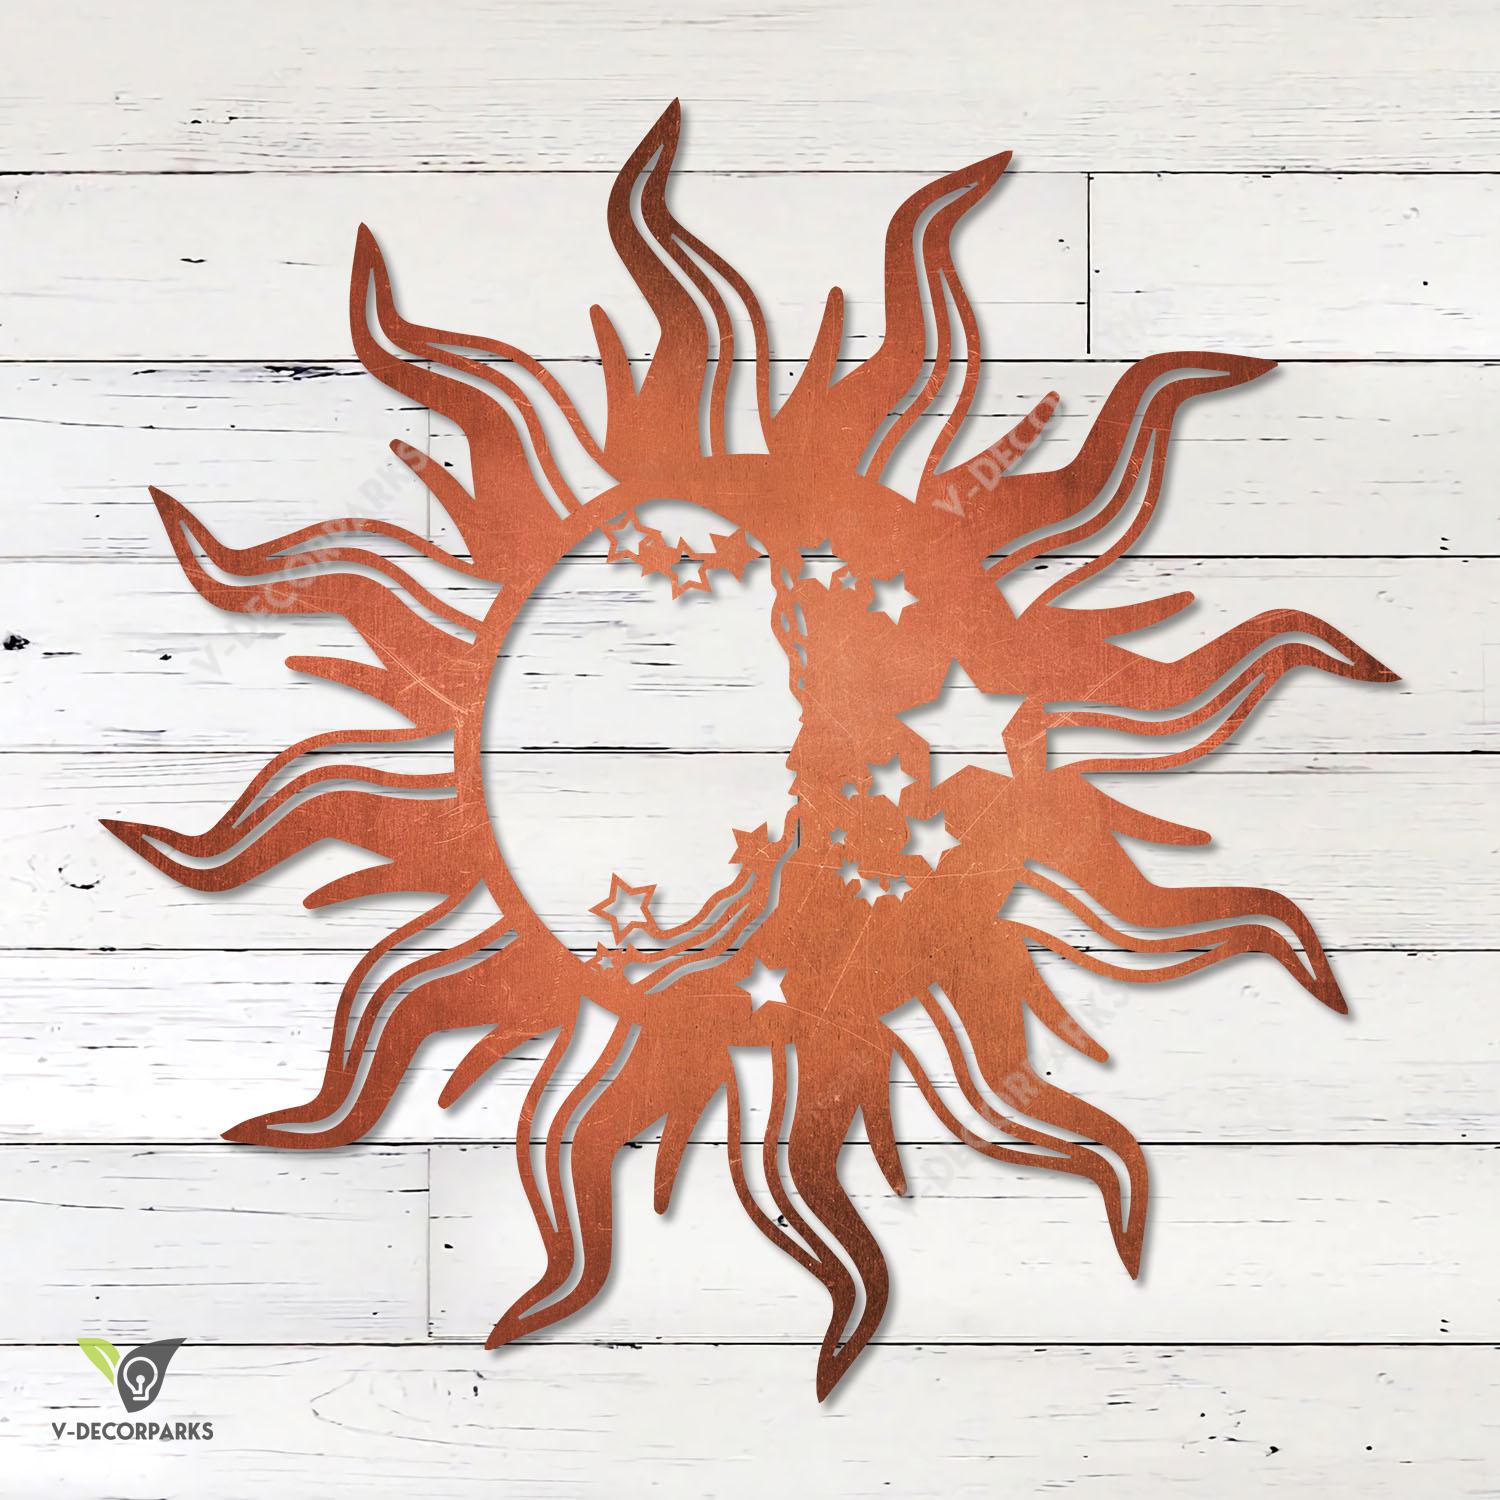 Celestial Sun Moon And Stars Copper Metal Wall Decoration, Sun Moon And Stars Fence Decor